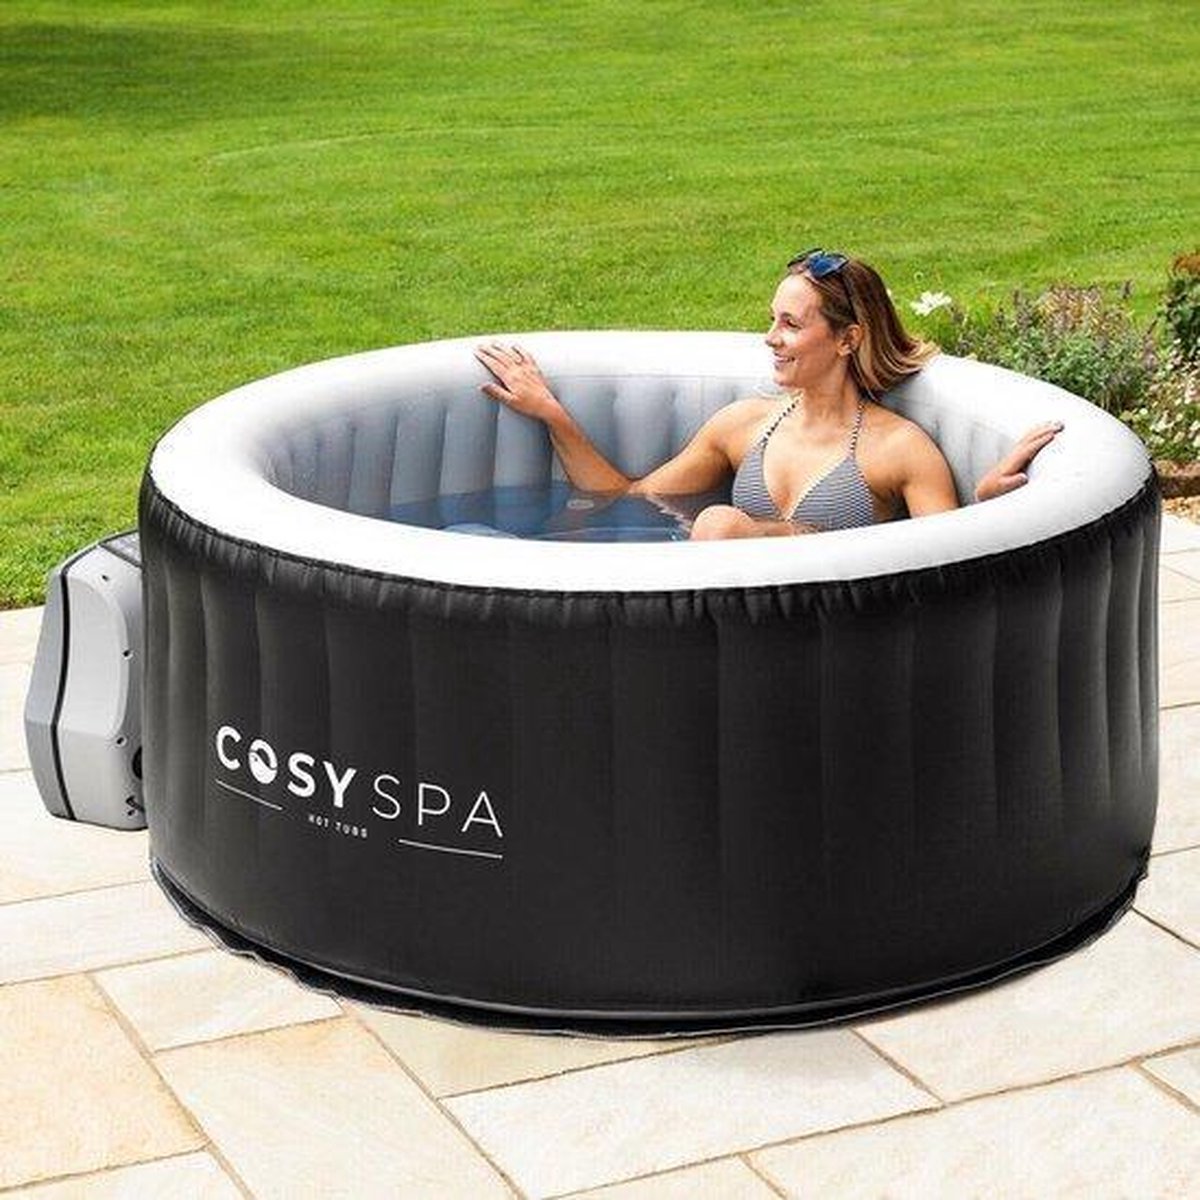 Cosy spa round - jacuzzi gonflable - spa gonflable - bain à bulles  gonflable - jacuzzi... | bol